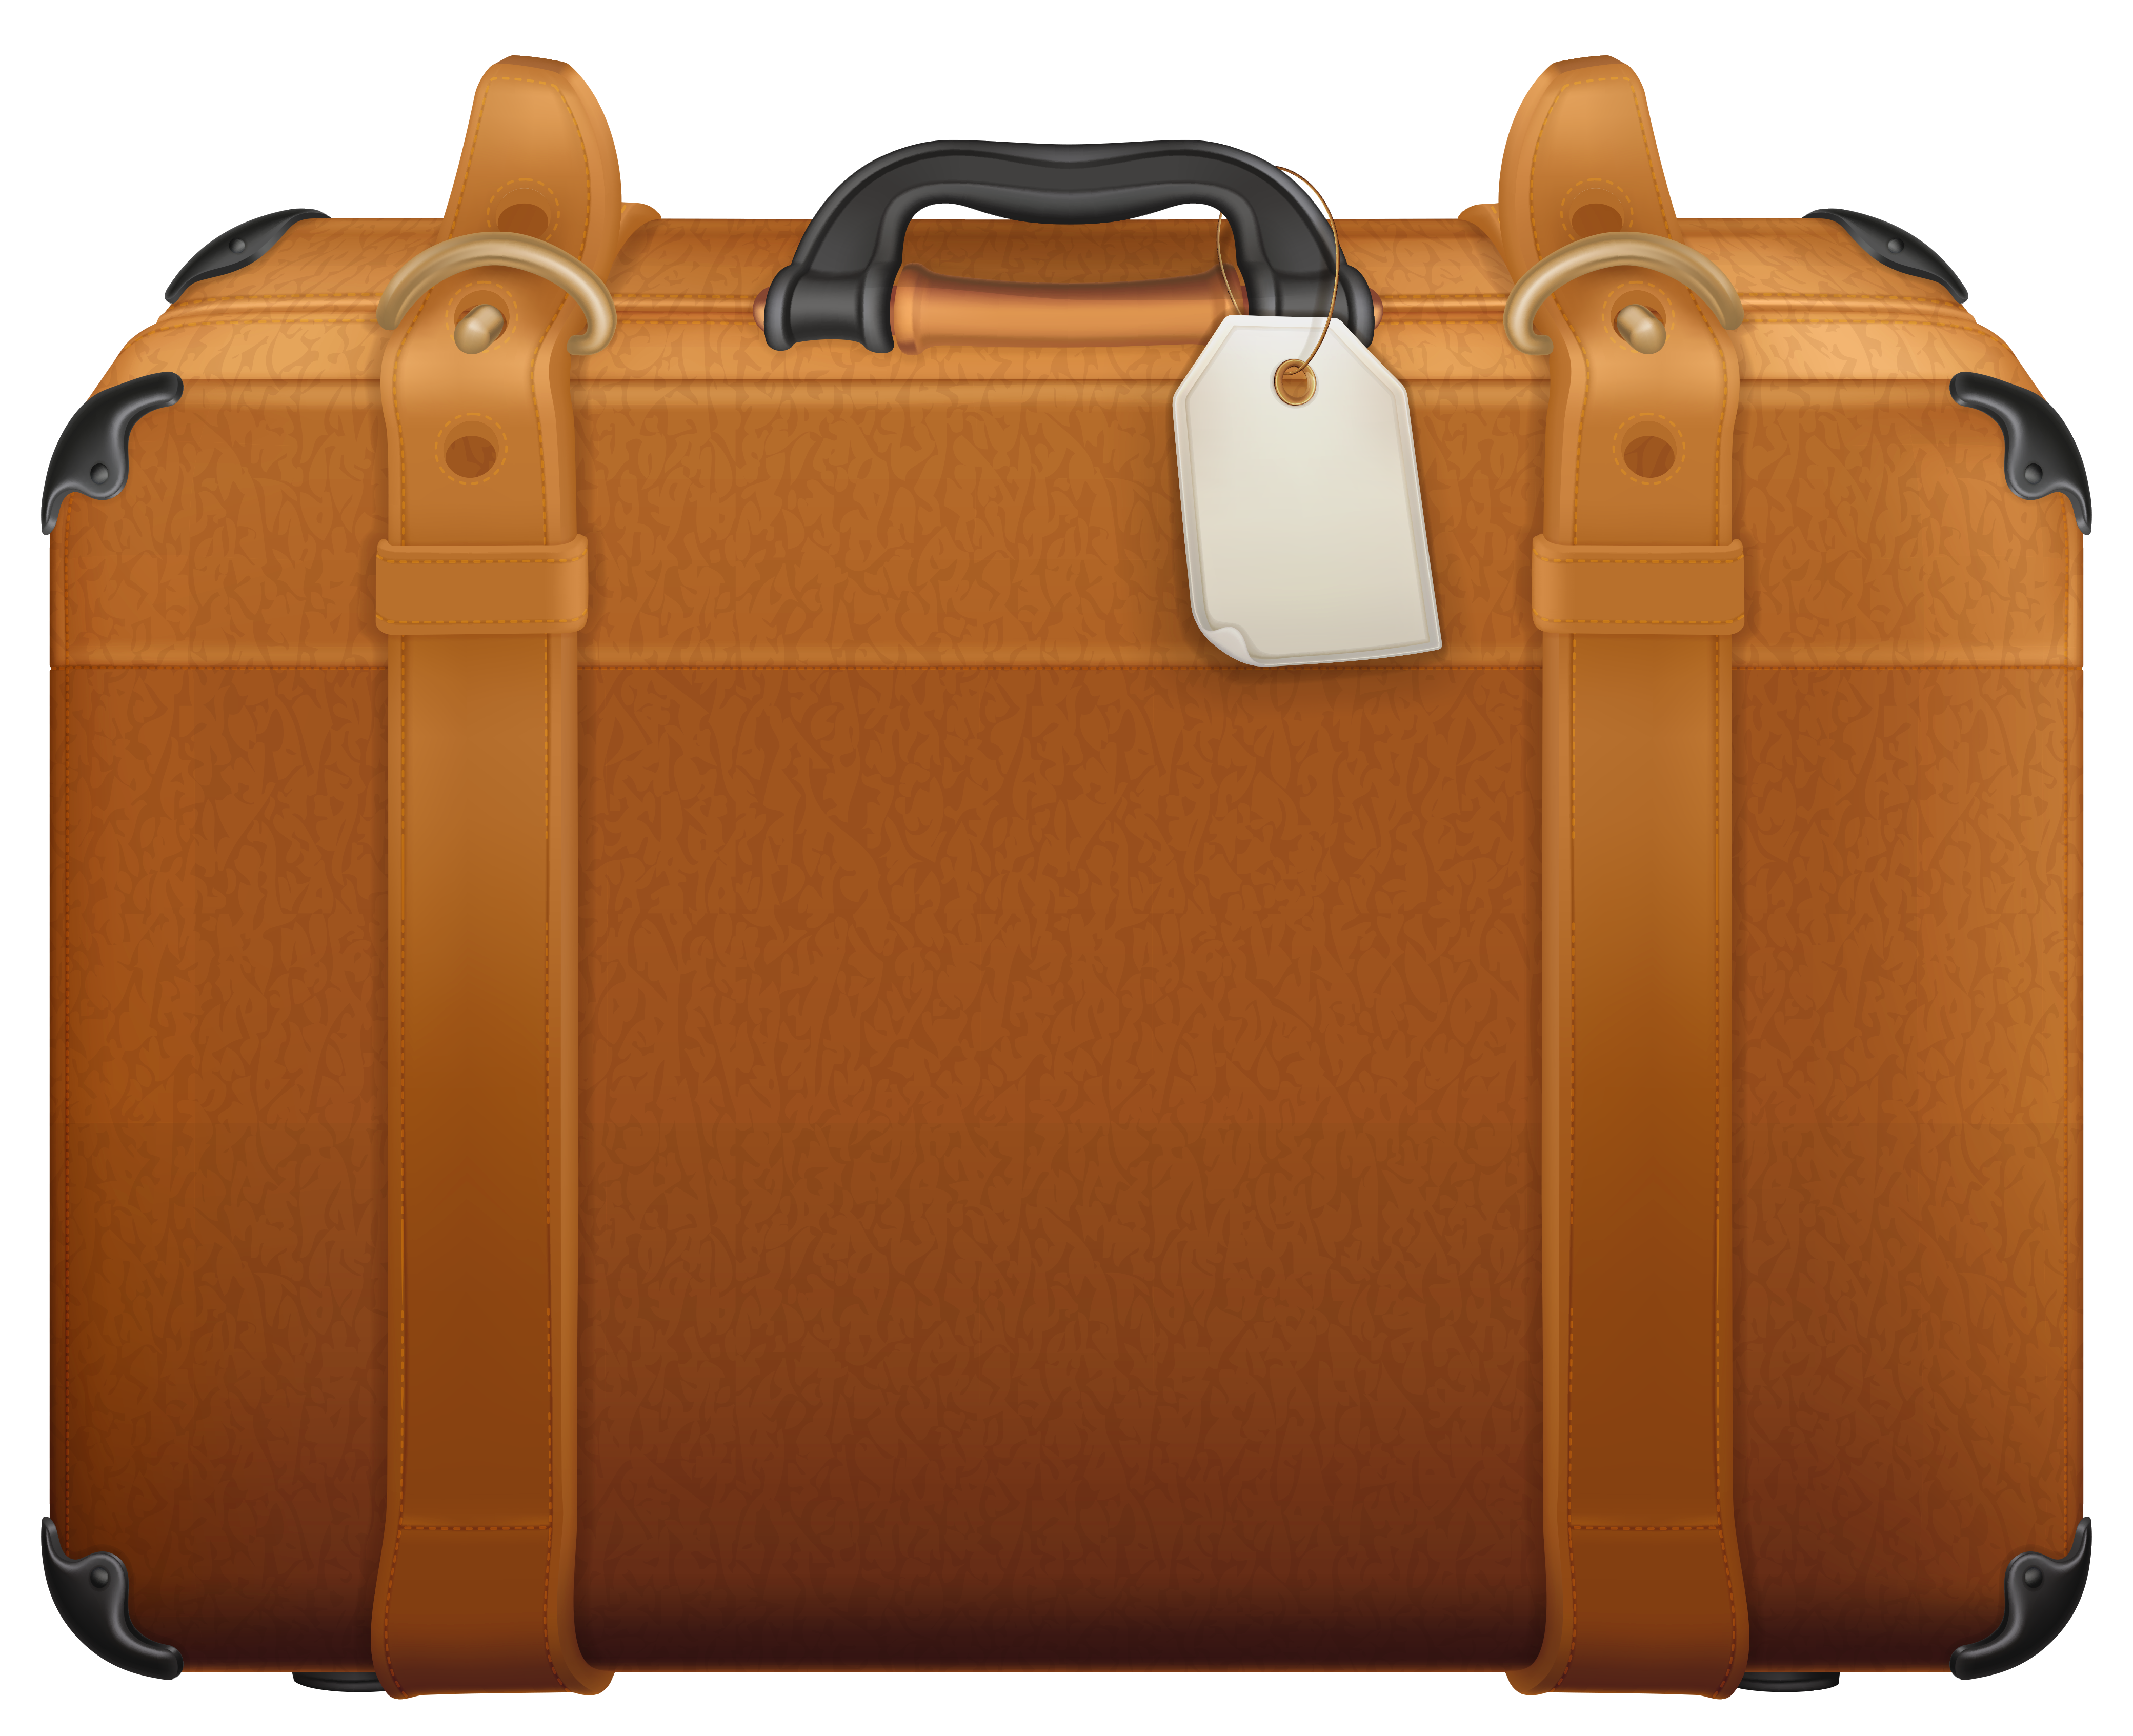 Suitcase clipart synkee 2